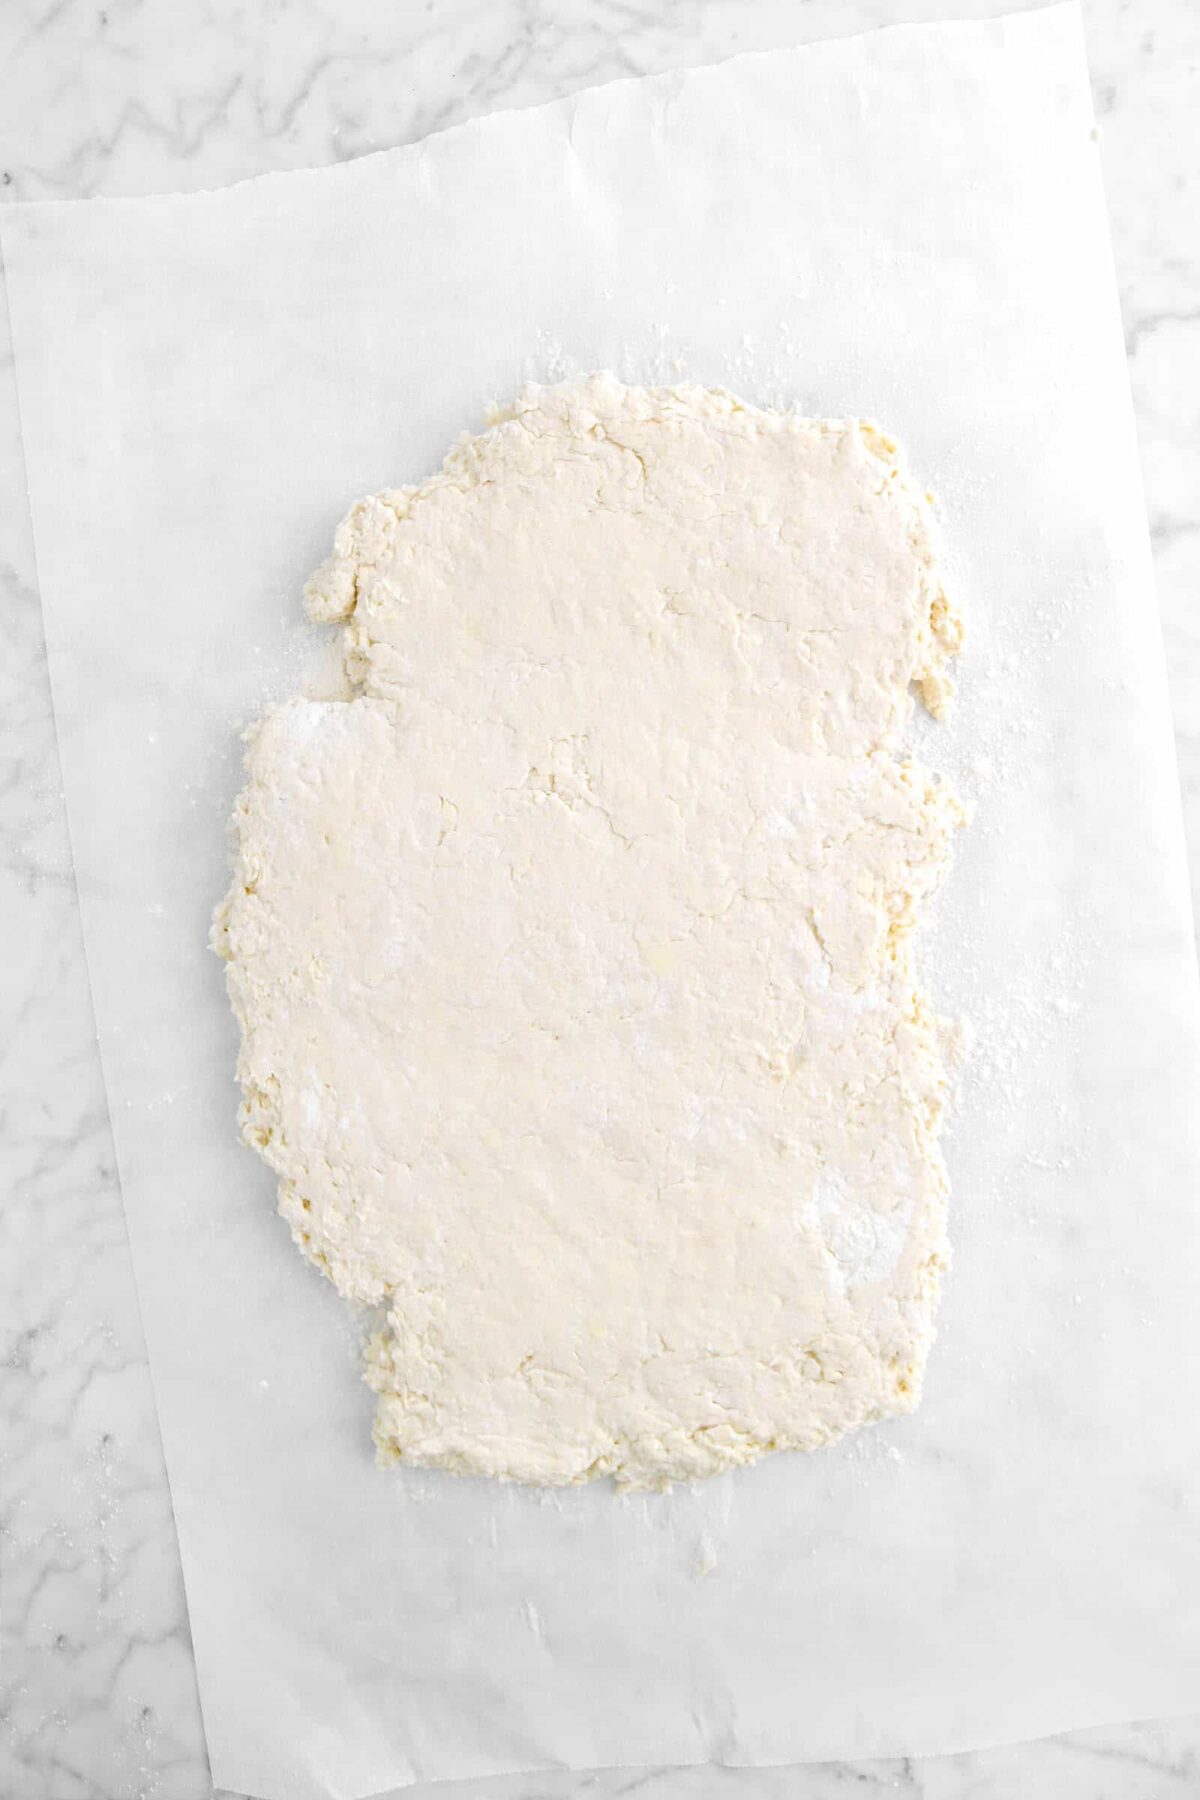 biscuit dough rolled out